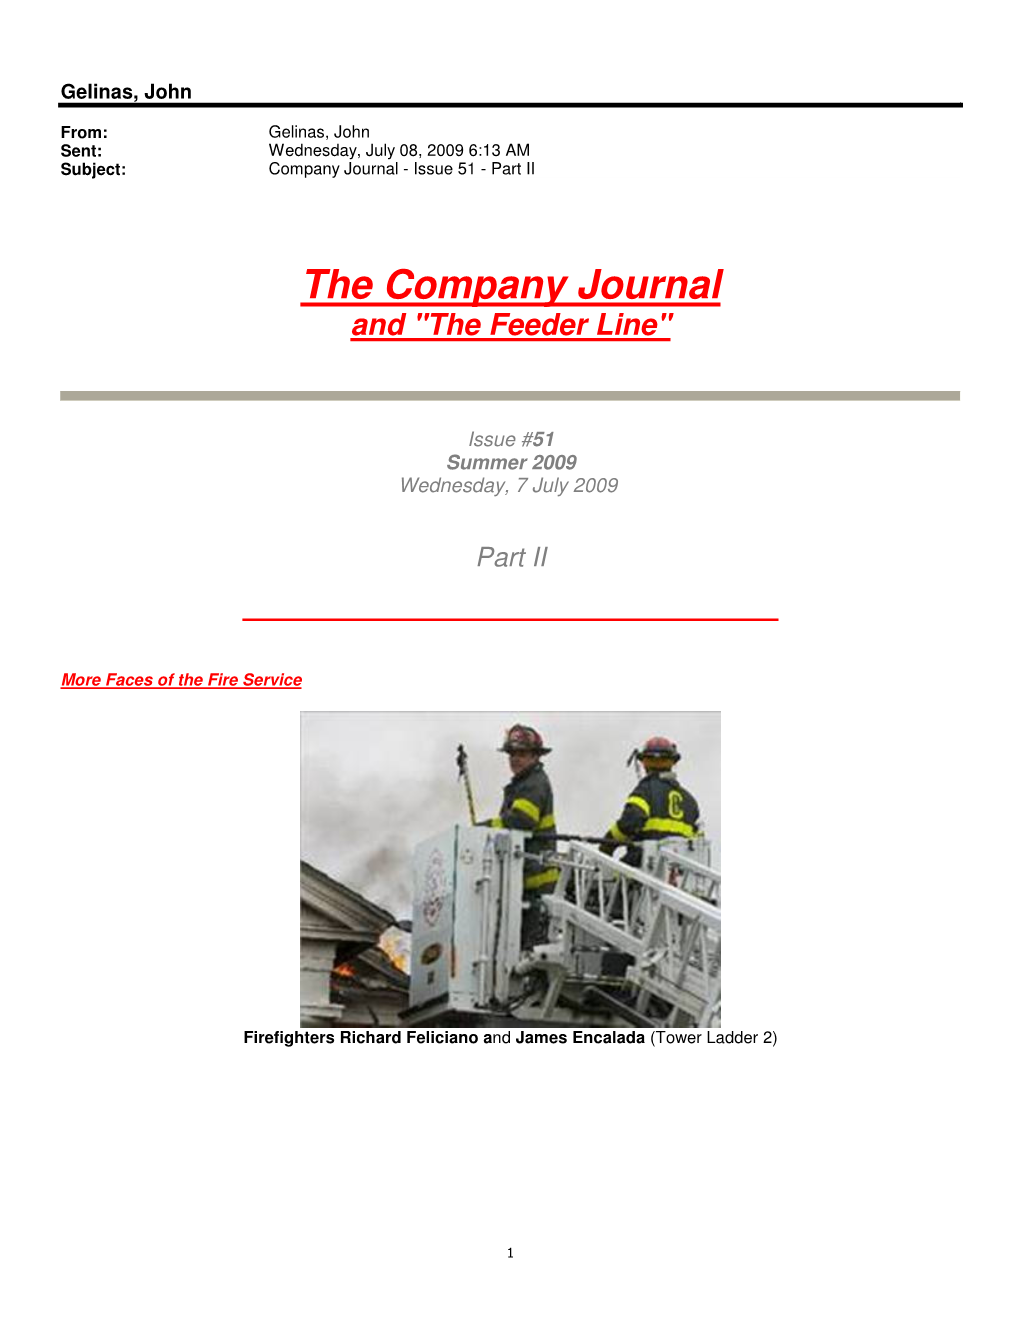 The Company Journal and "The Feeder Line"